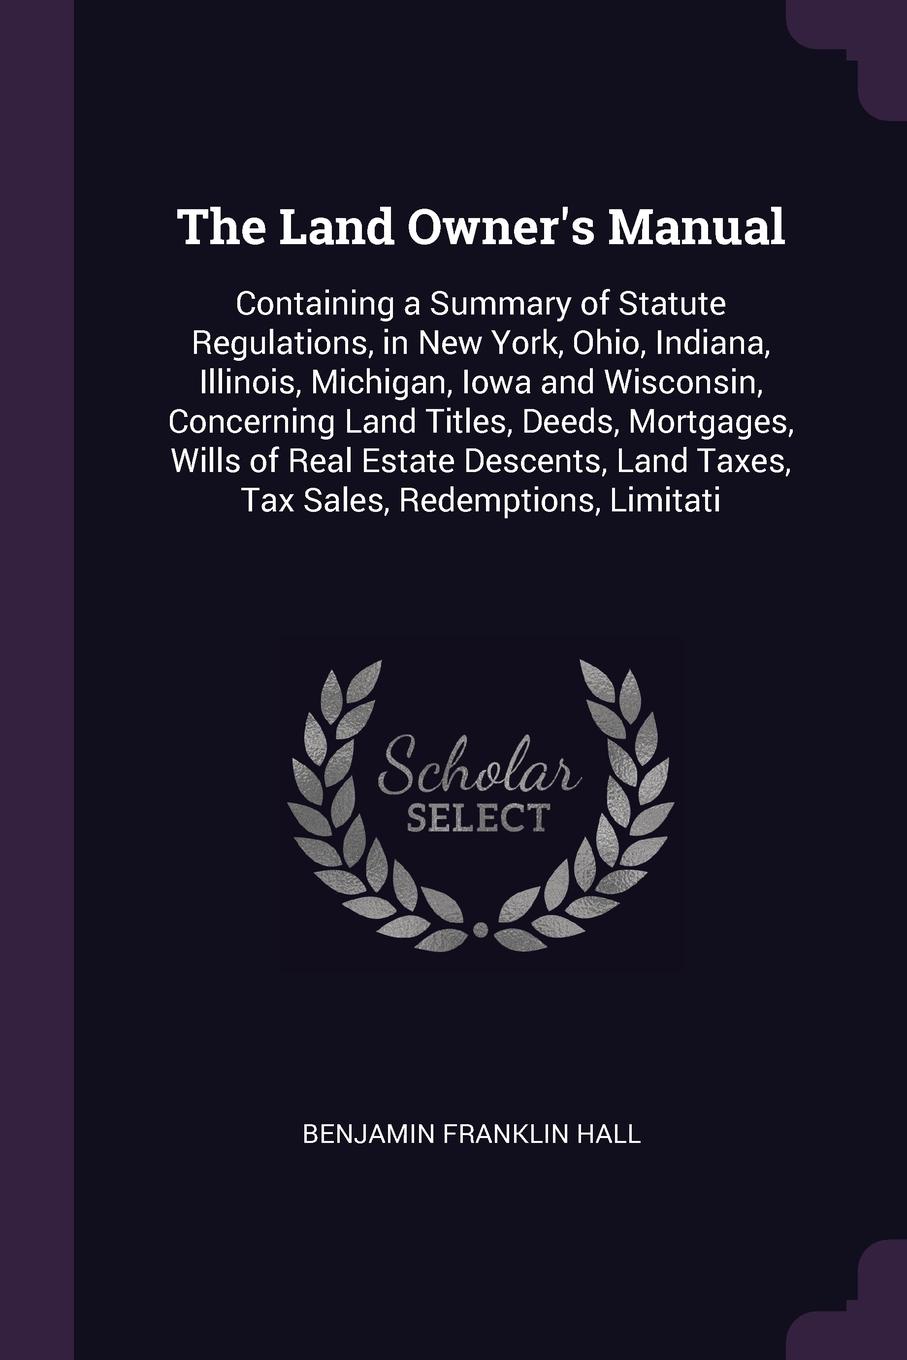 The Land Owner`s Manual. Containing a Summary of Statute Regulations, in New York, Ohio, Indiana, Illinois, Michigan, Iowa and Wisconsin, Concerning Land Titles, Deeds, Mortgages, Wills of Real Estate Descents, Land Taxes, Tax Sales, Redemptions, ...